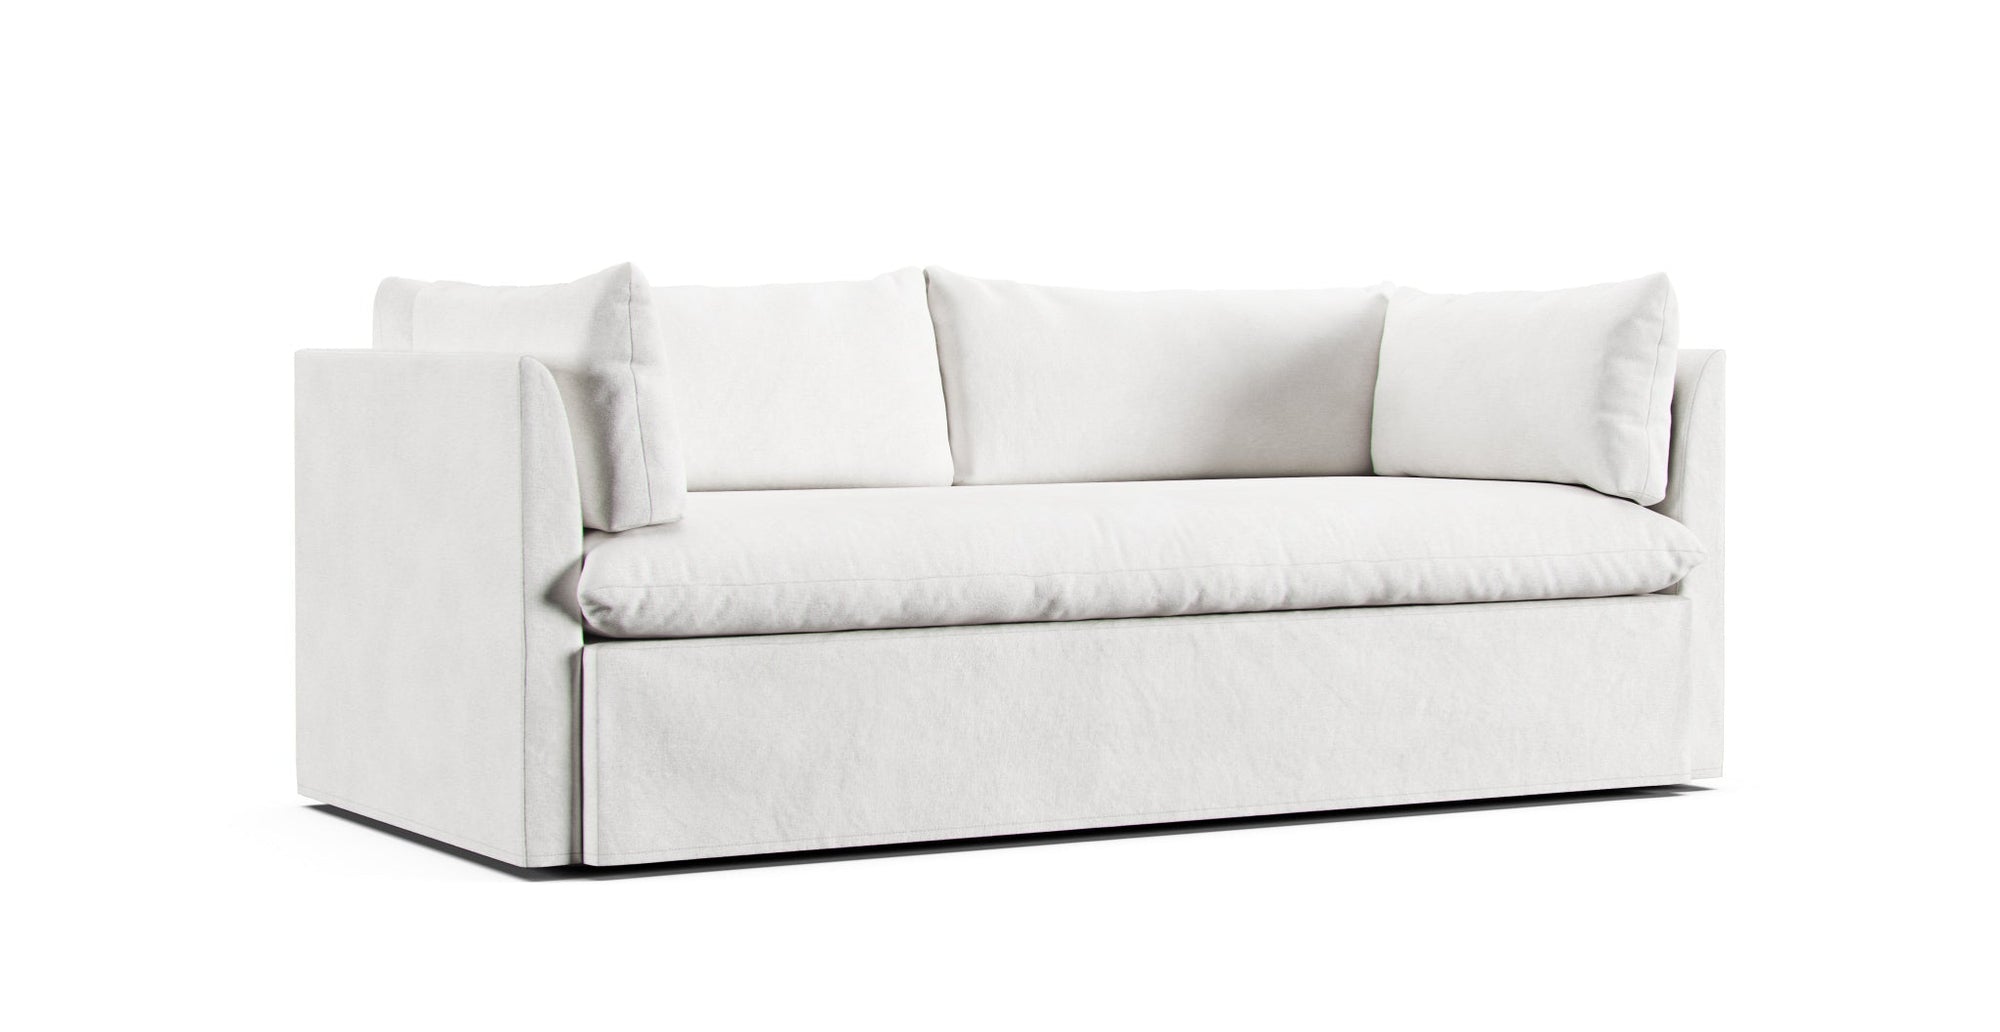 West Elm Shelter eighty-four inches sofa featuring white Pure Linen slipcover